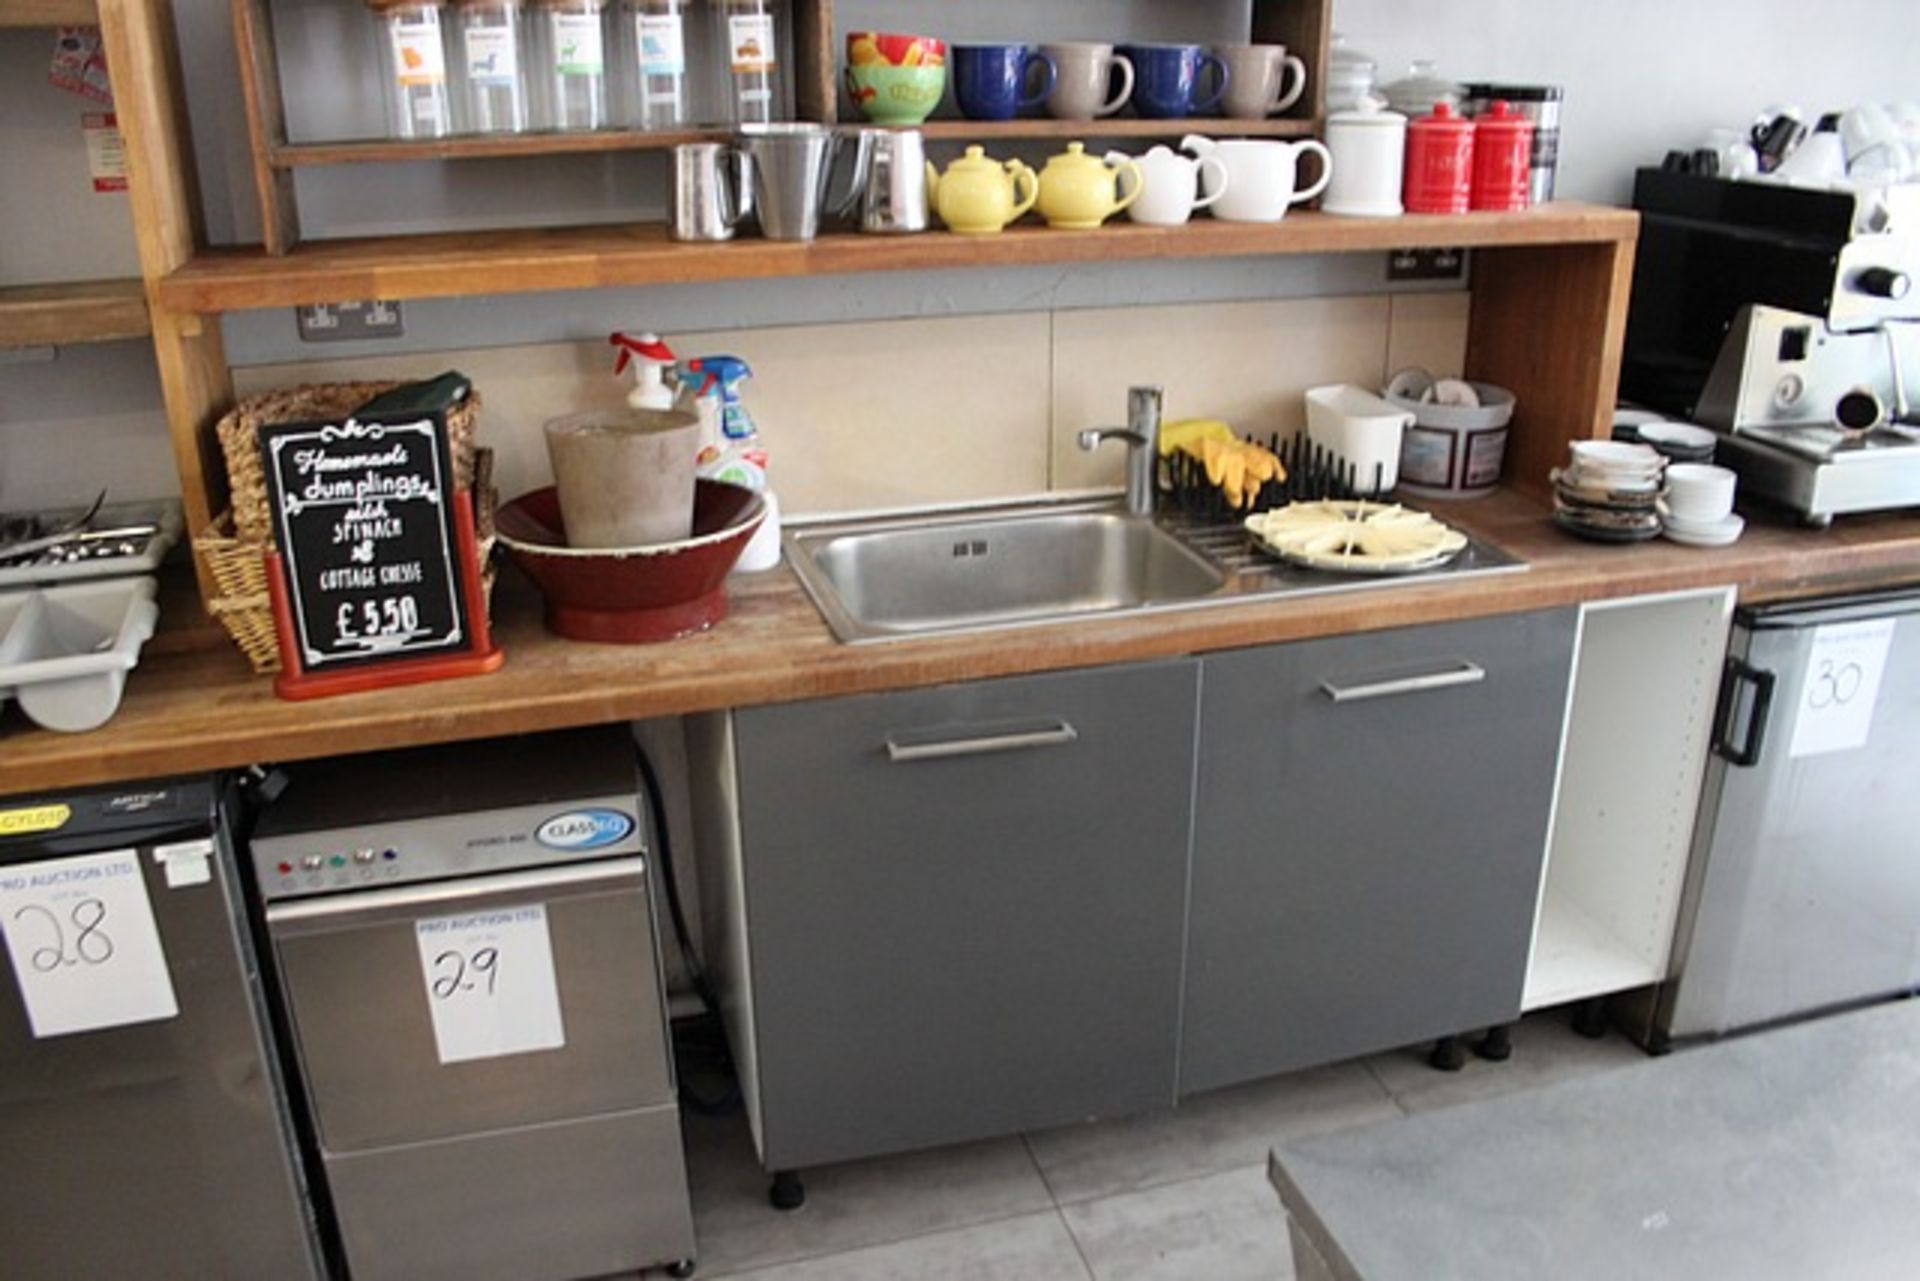 Hardwood countering and shelving (excludes refrigeration) but include back counters worktops storage